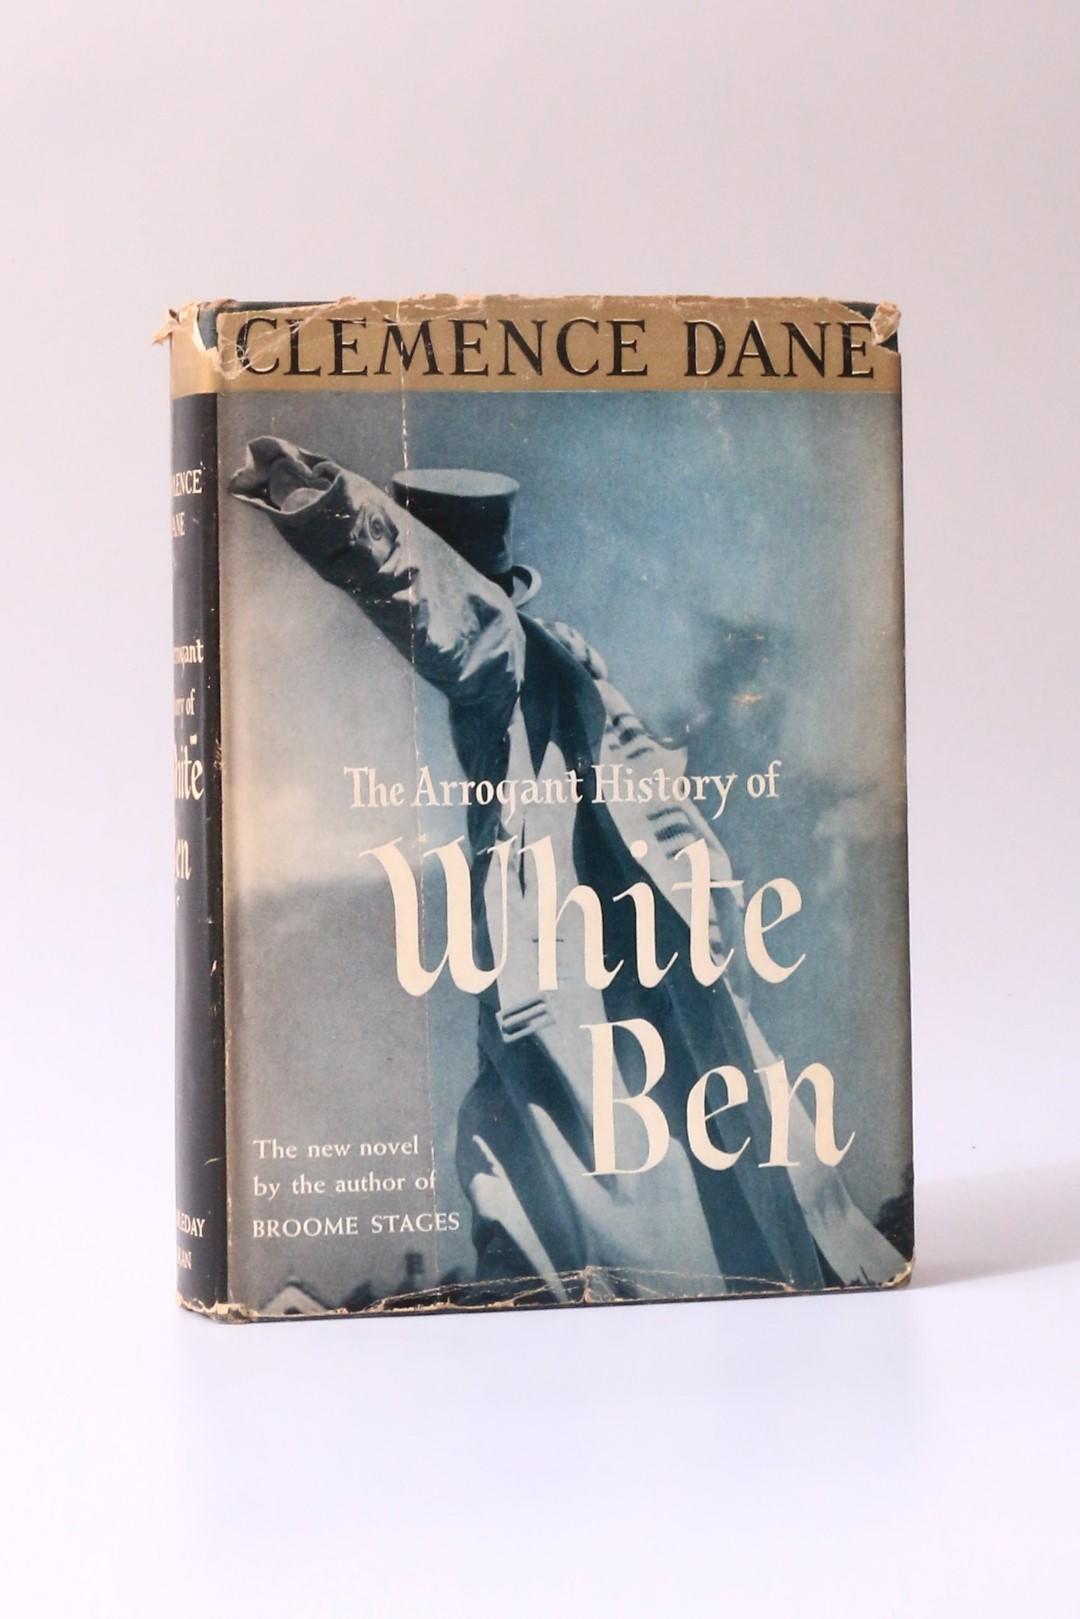 Clemence Dane - The Arrogant History of White Ben - Doubleday Doran, 1939, Signed First Edition.